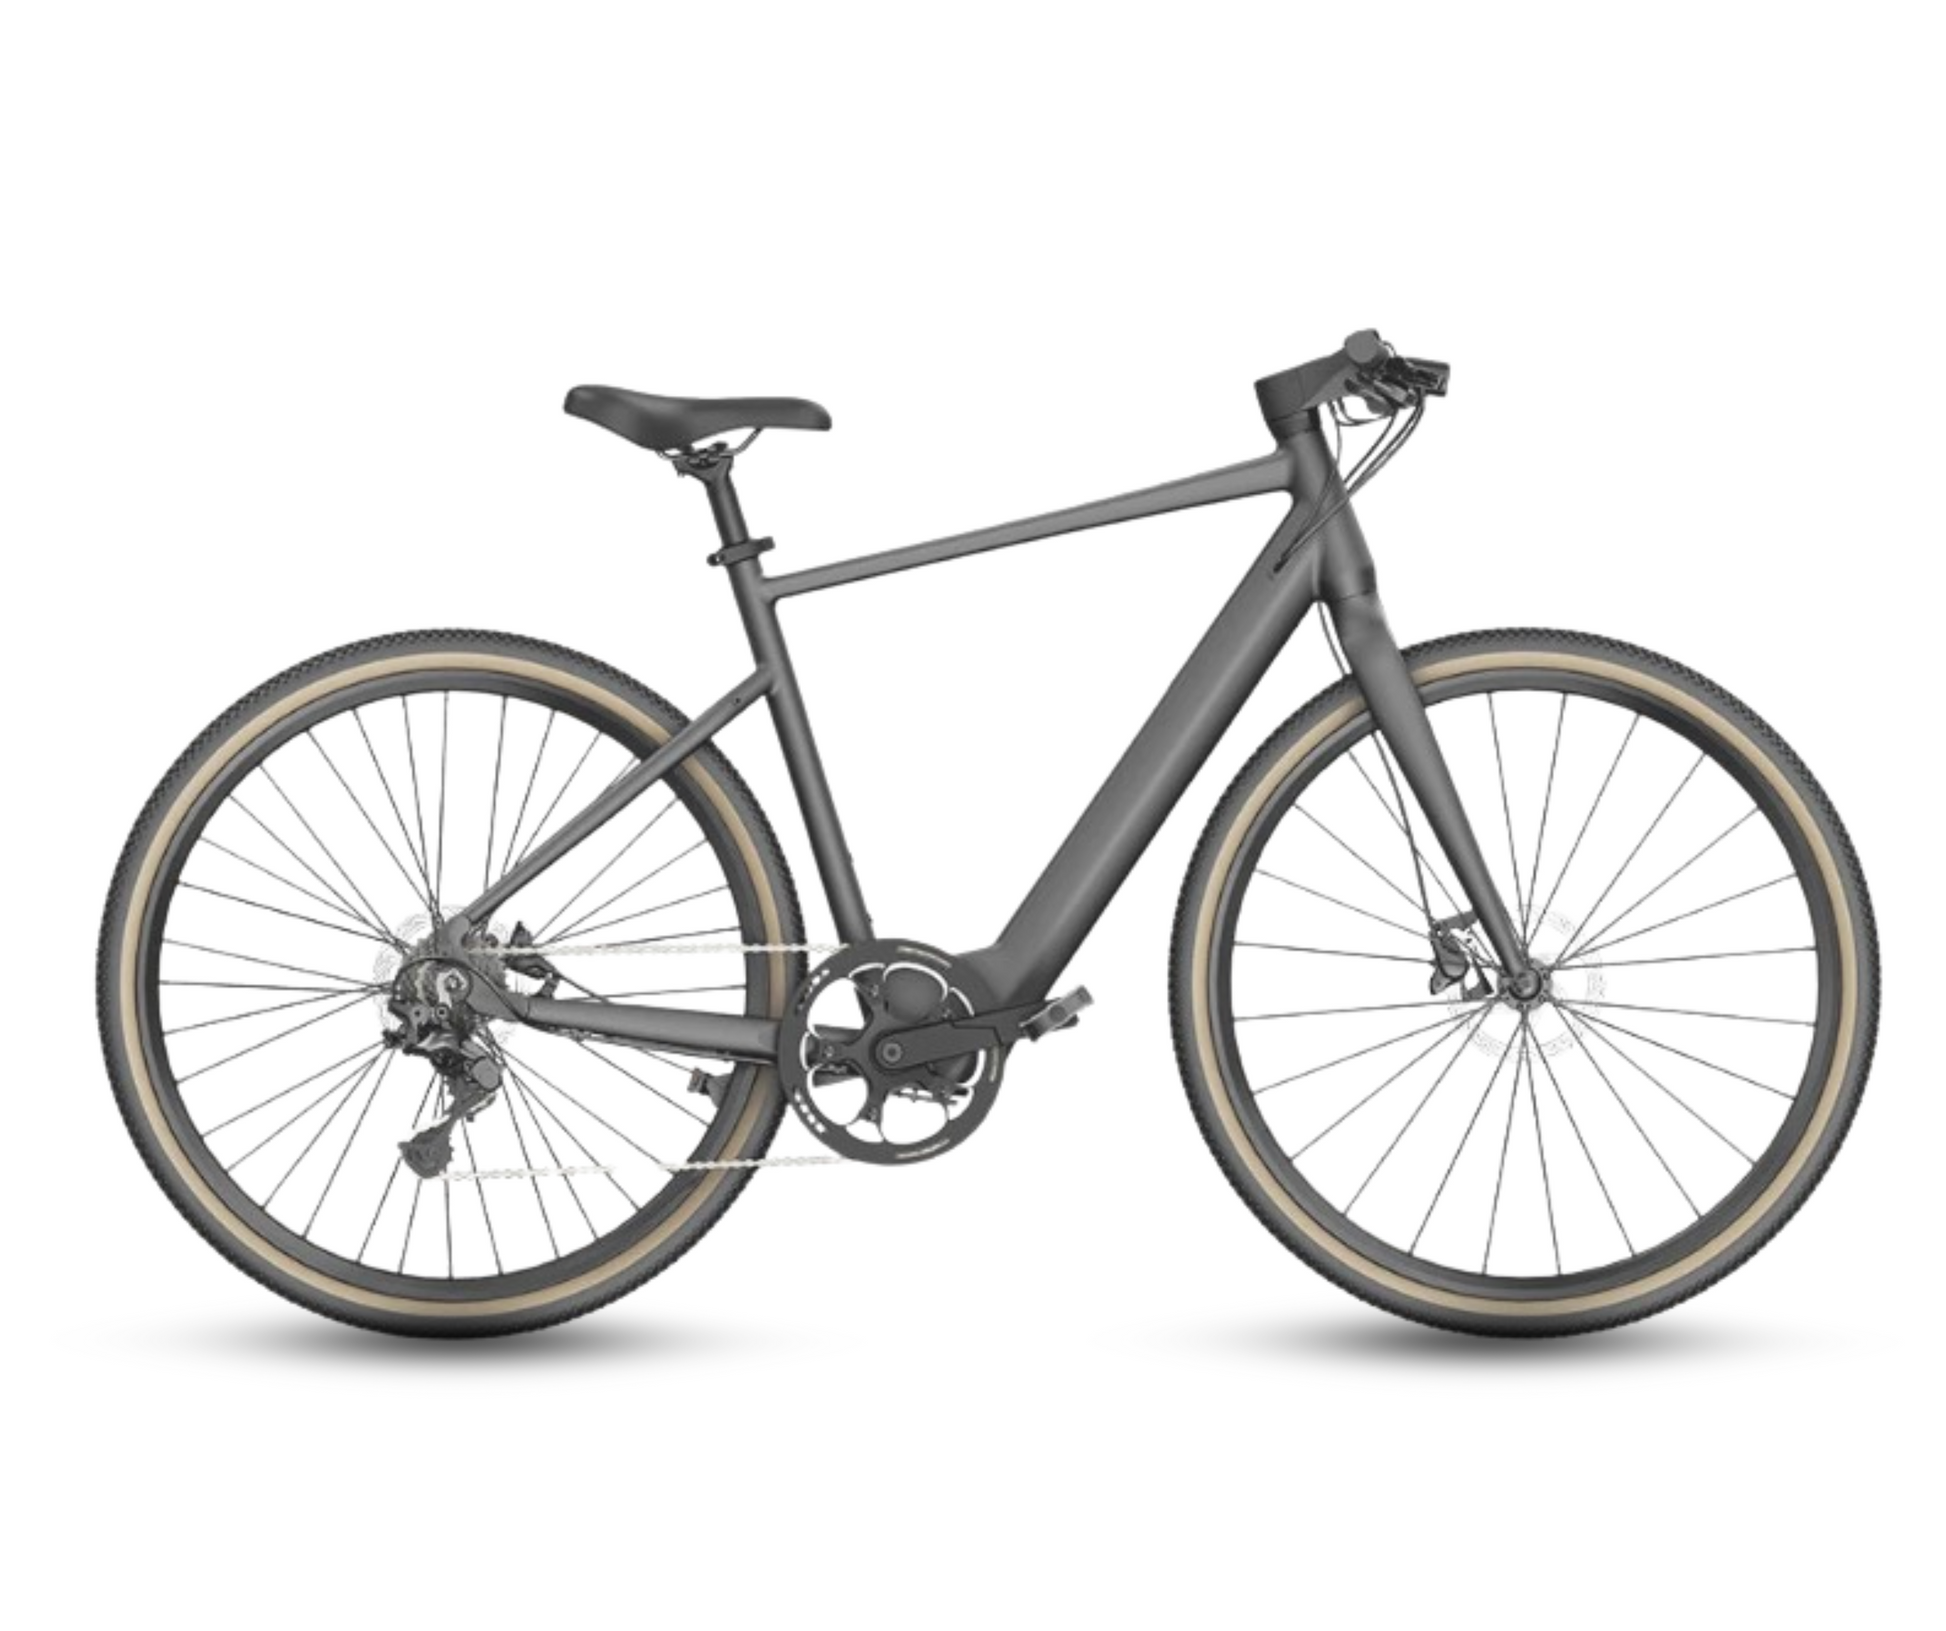 Fiido C21 bicycle in a neutral gray tone, showcasing a full side profile.